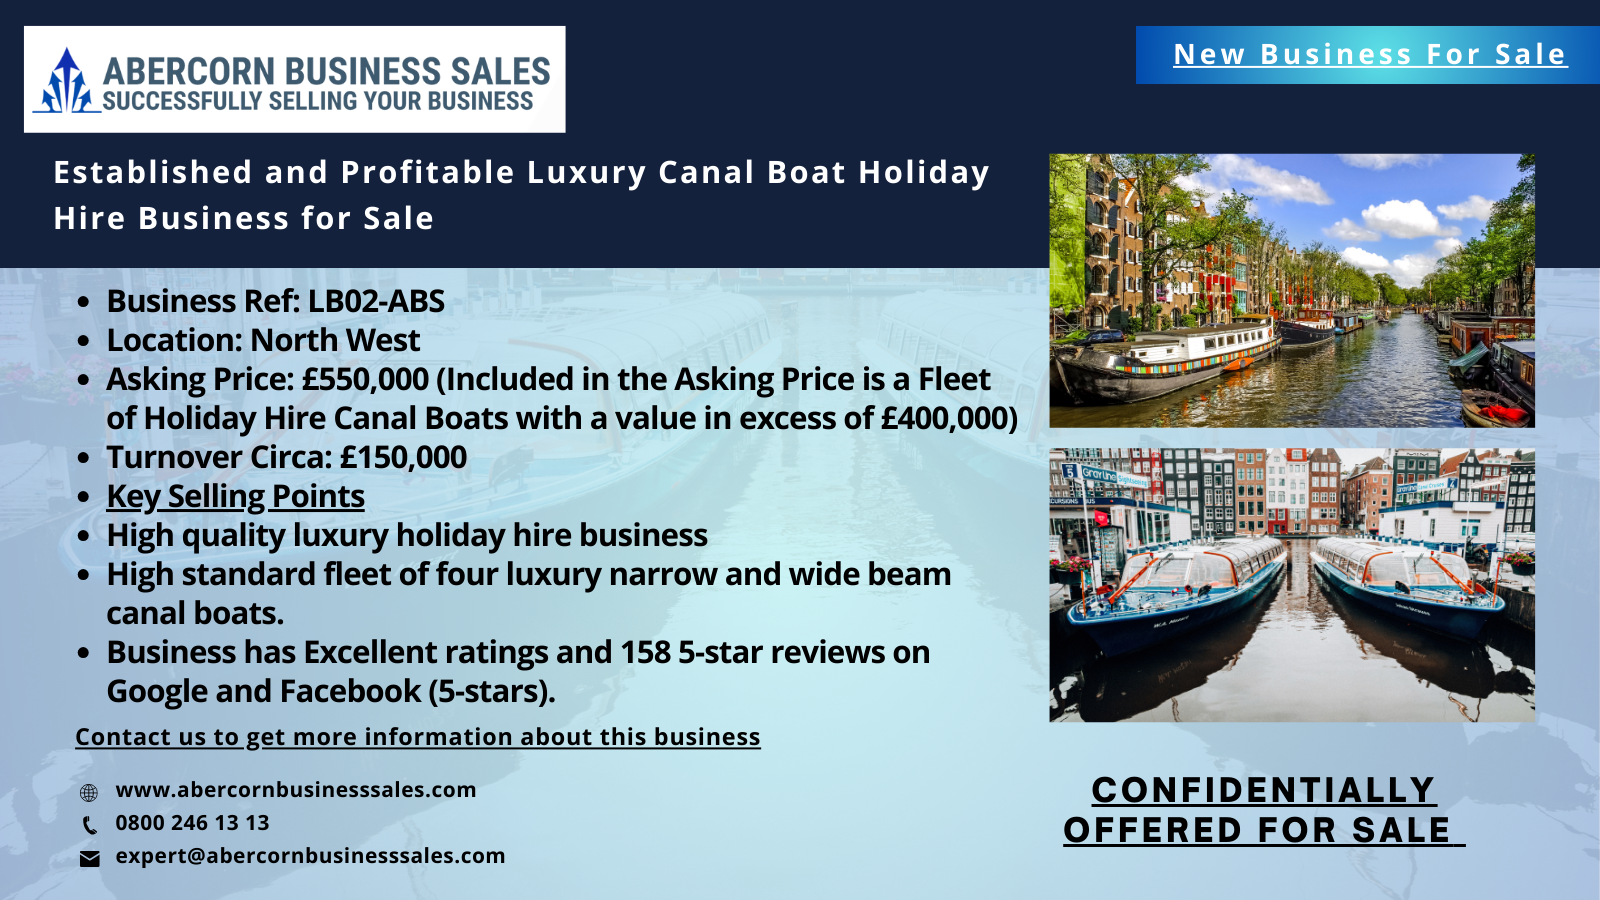 LB02-ABS - Established and Profitable Luxury Canal Boat Holiday Hire Business for Sale